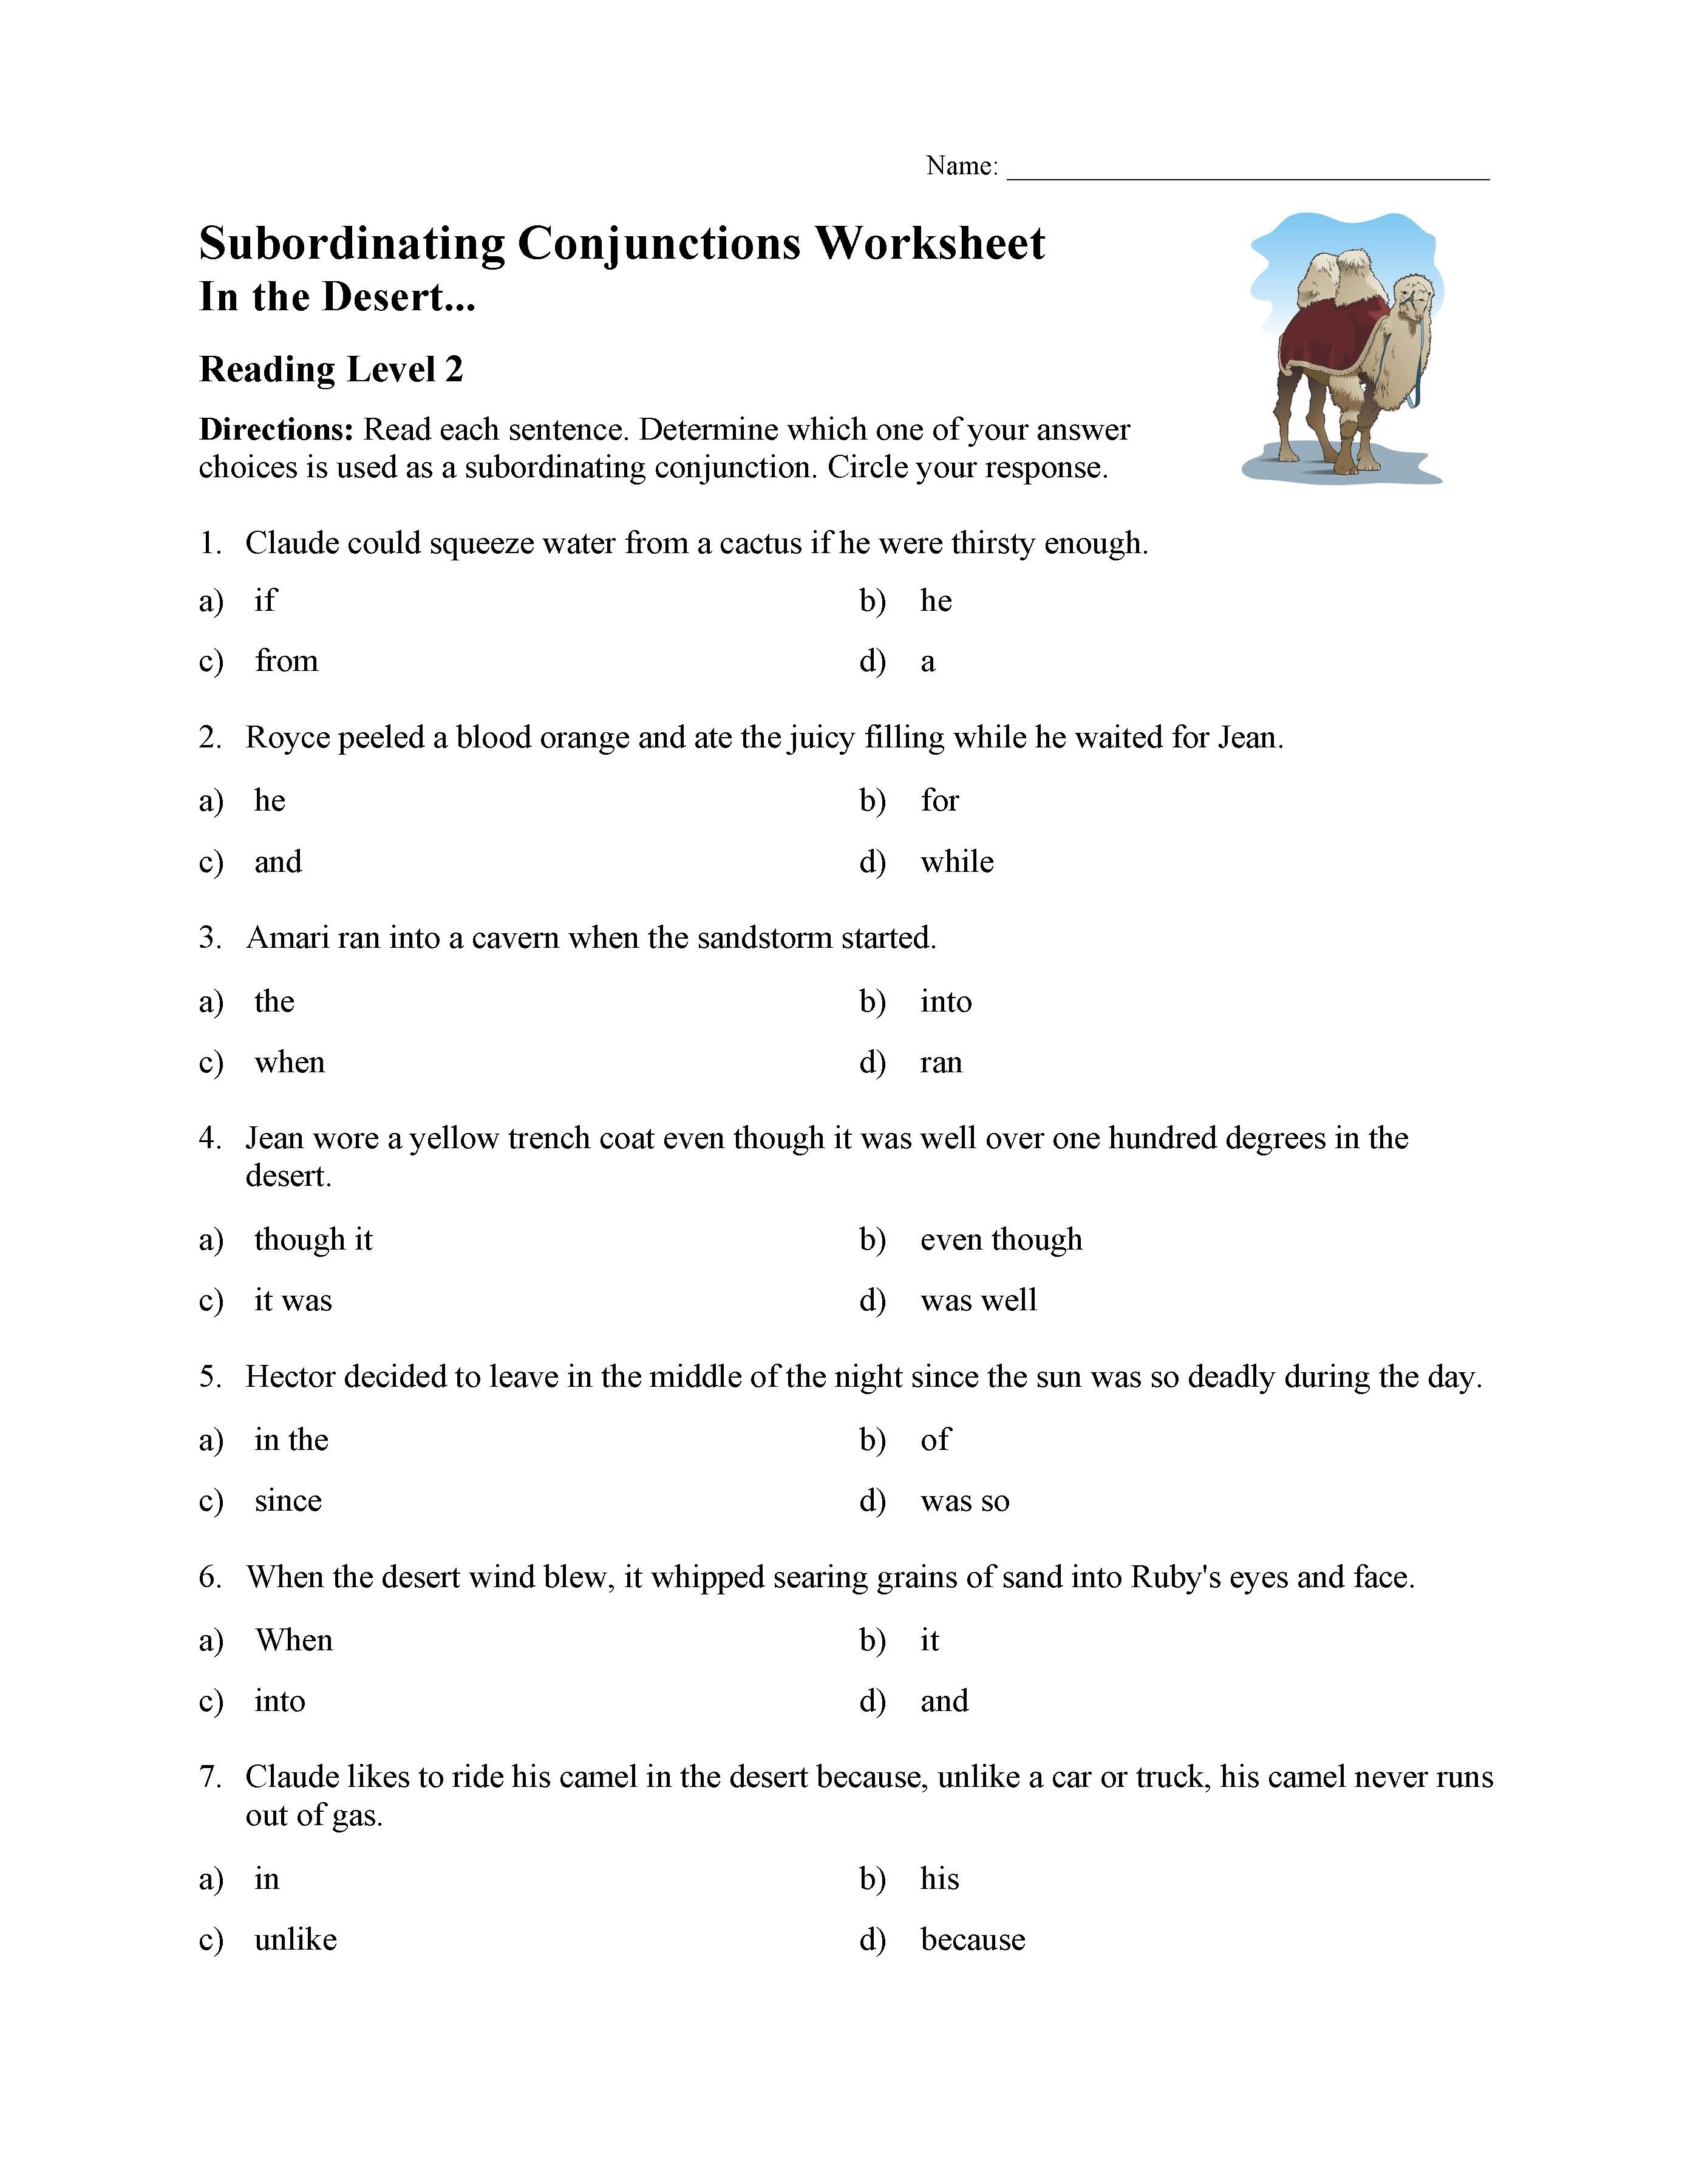 Subordinating Conjunctions Worksheet Reading Level 2 Preview